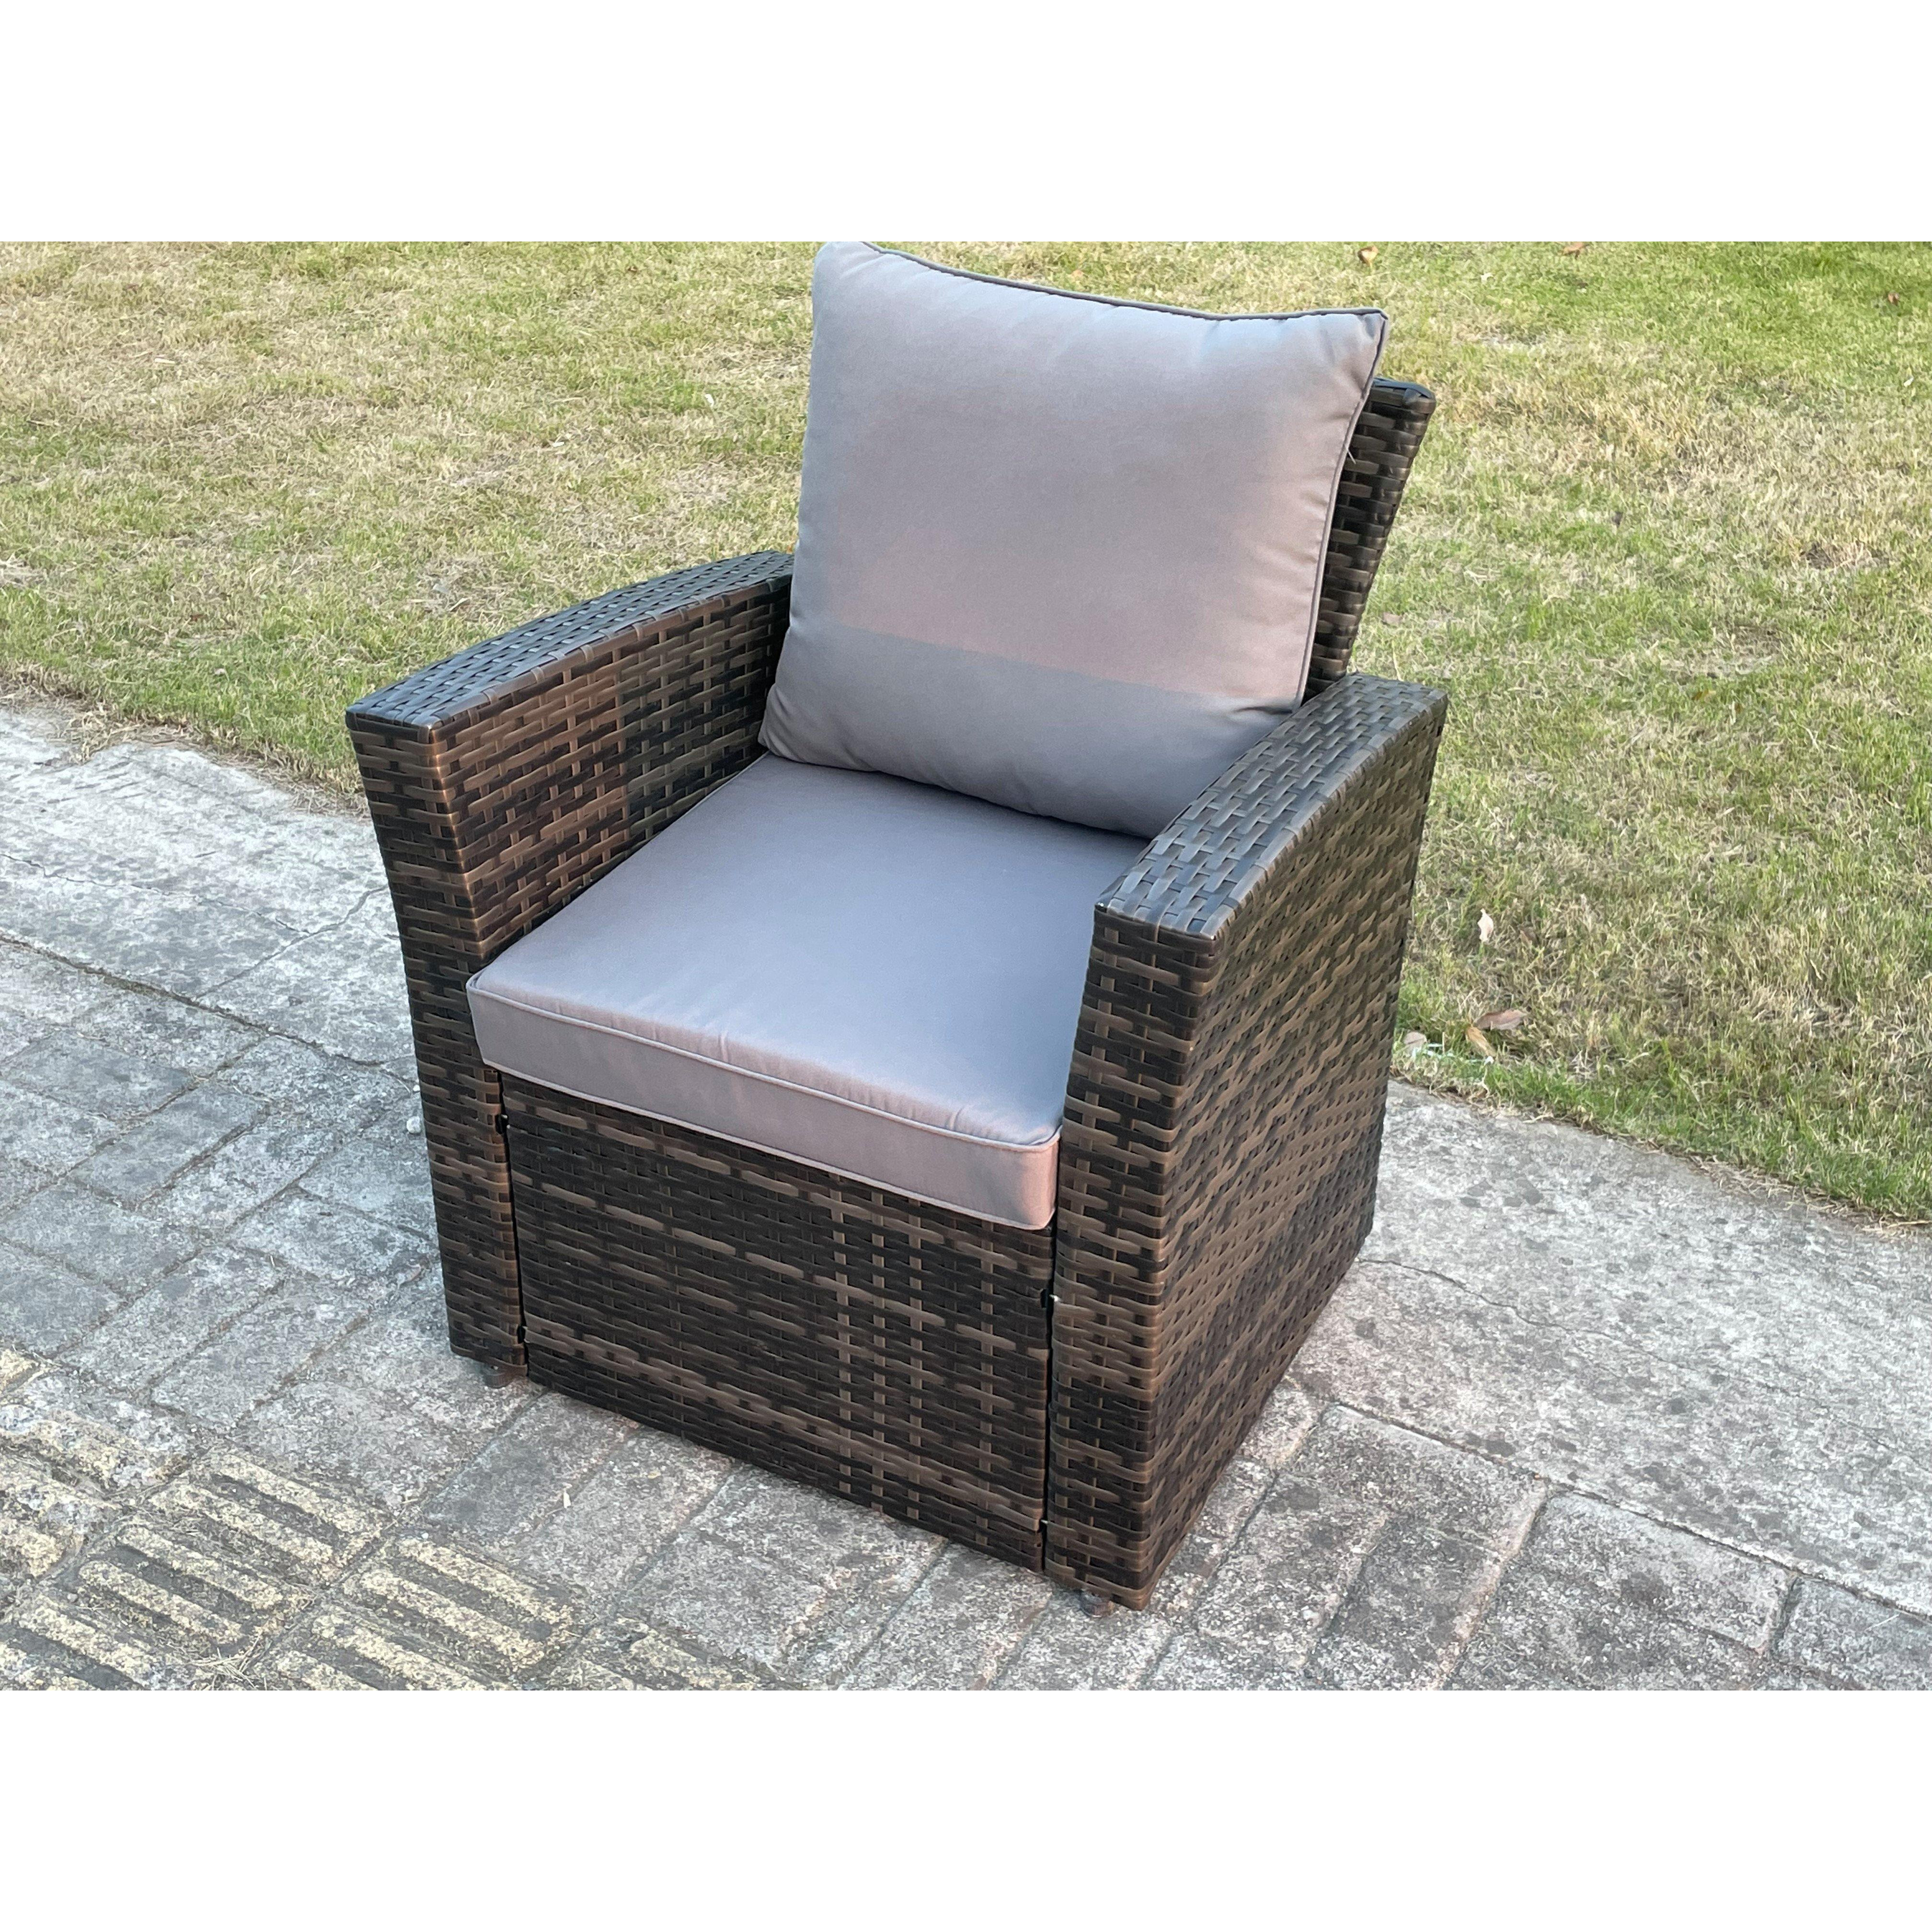 High Back Rattan Arm Chair Patio Outdoor Garden Furniture with Cushion - image 1